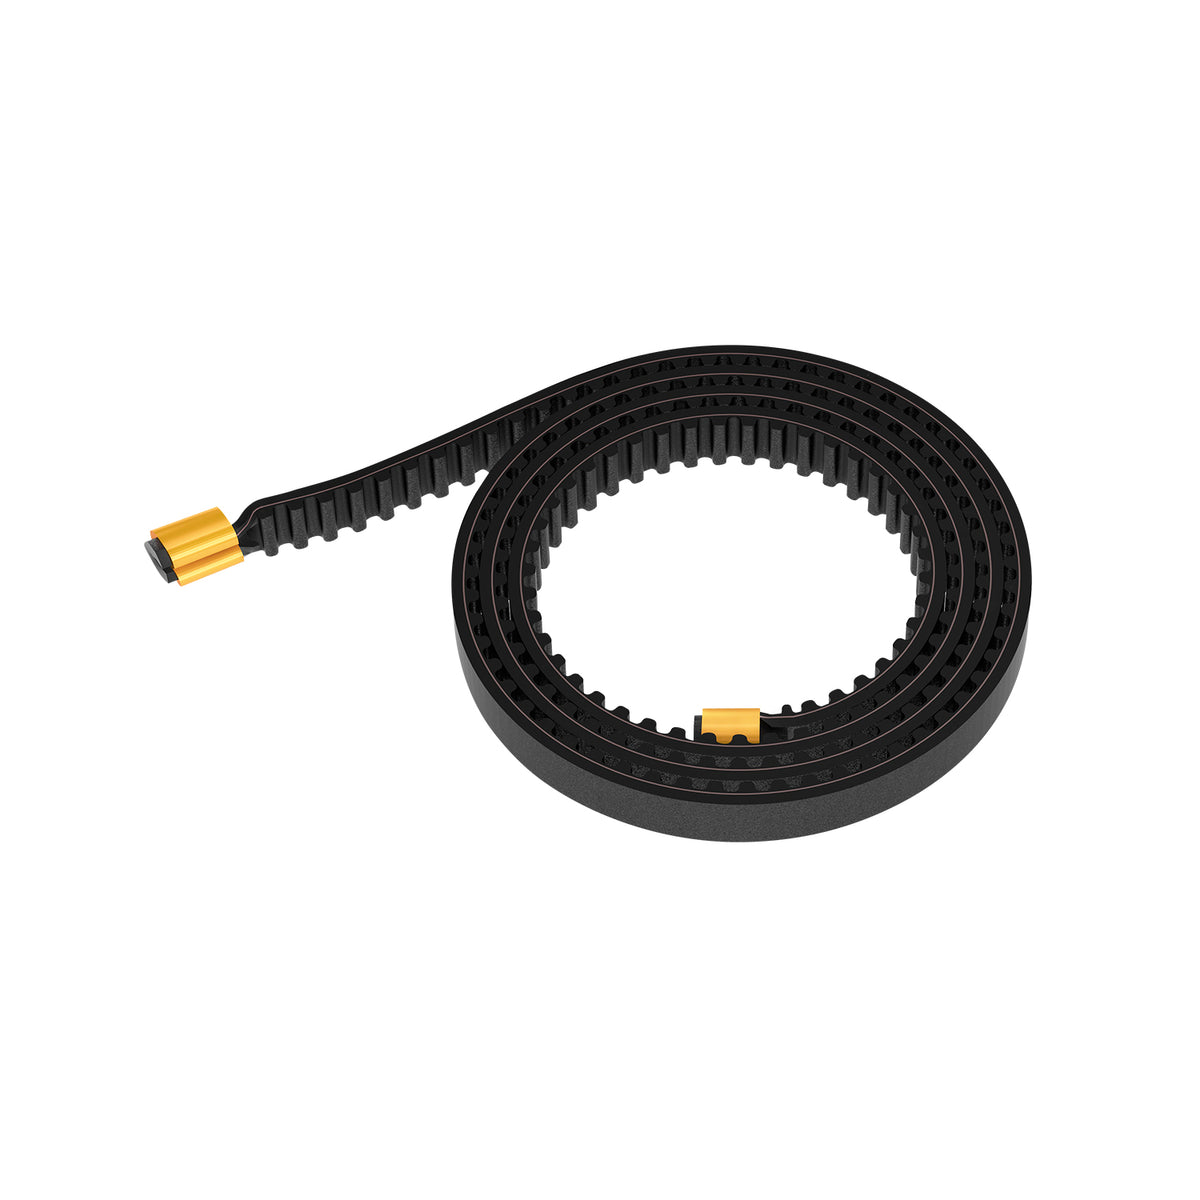 Creality Ender 3 Pro / CR20 / CR20 Pro X and Y-axis Timing Belt